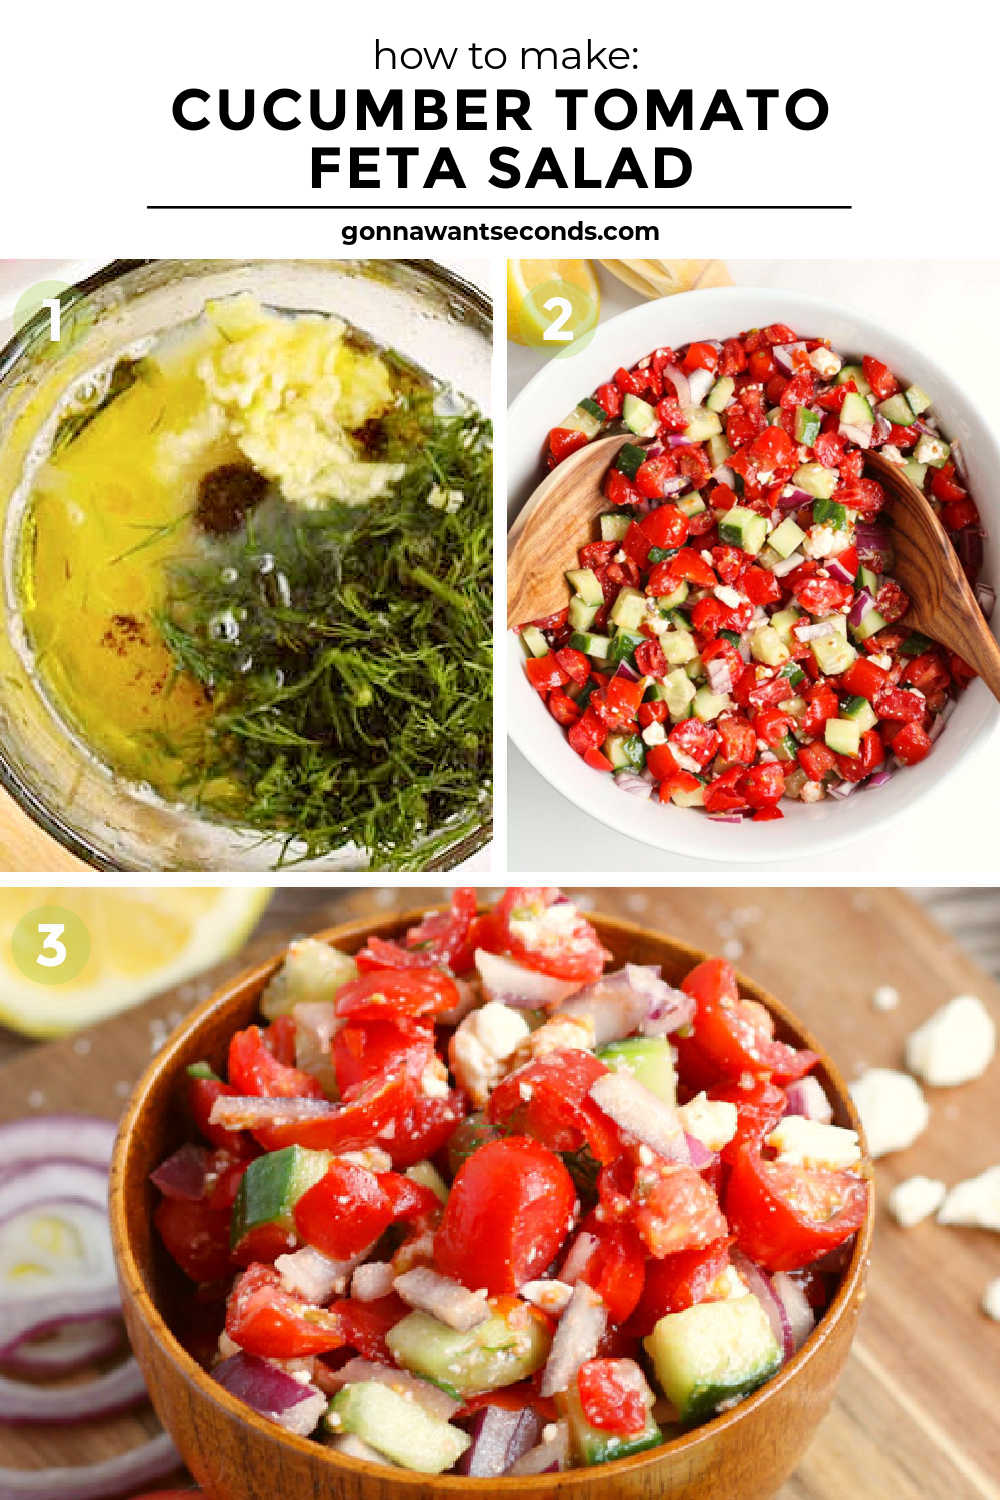 Step by step how to make cucumber tomato feta salad